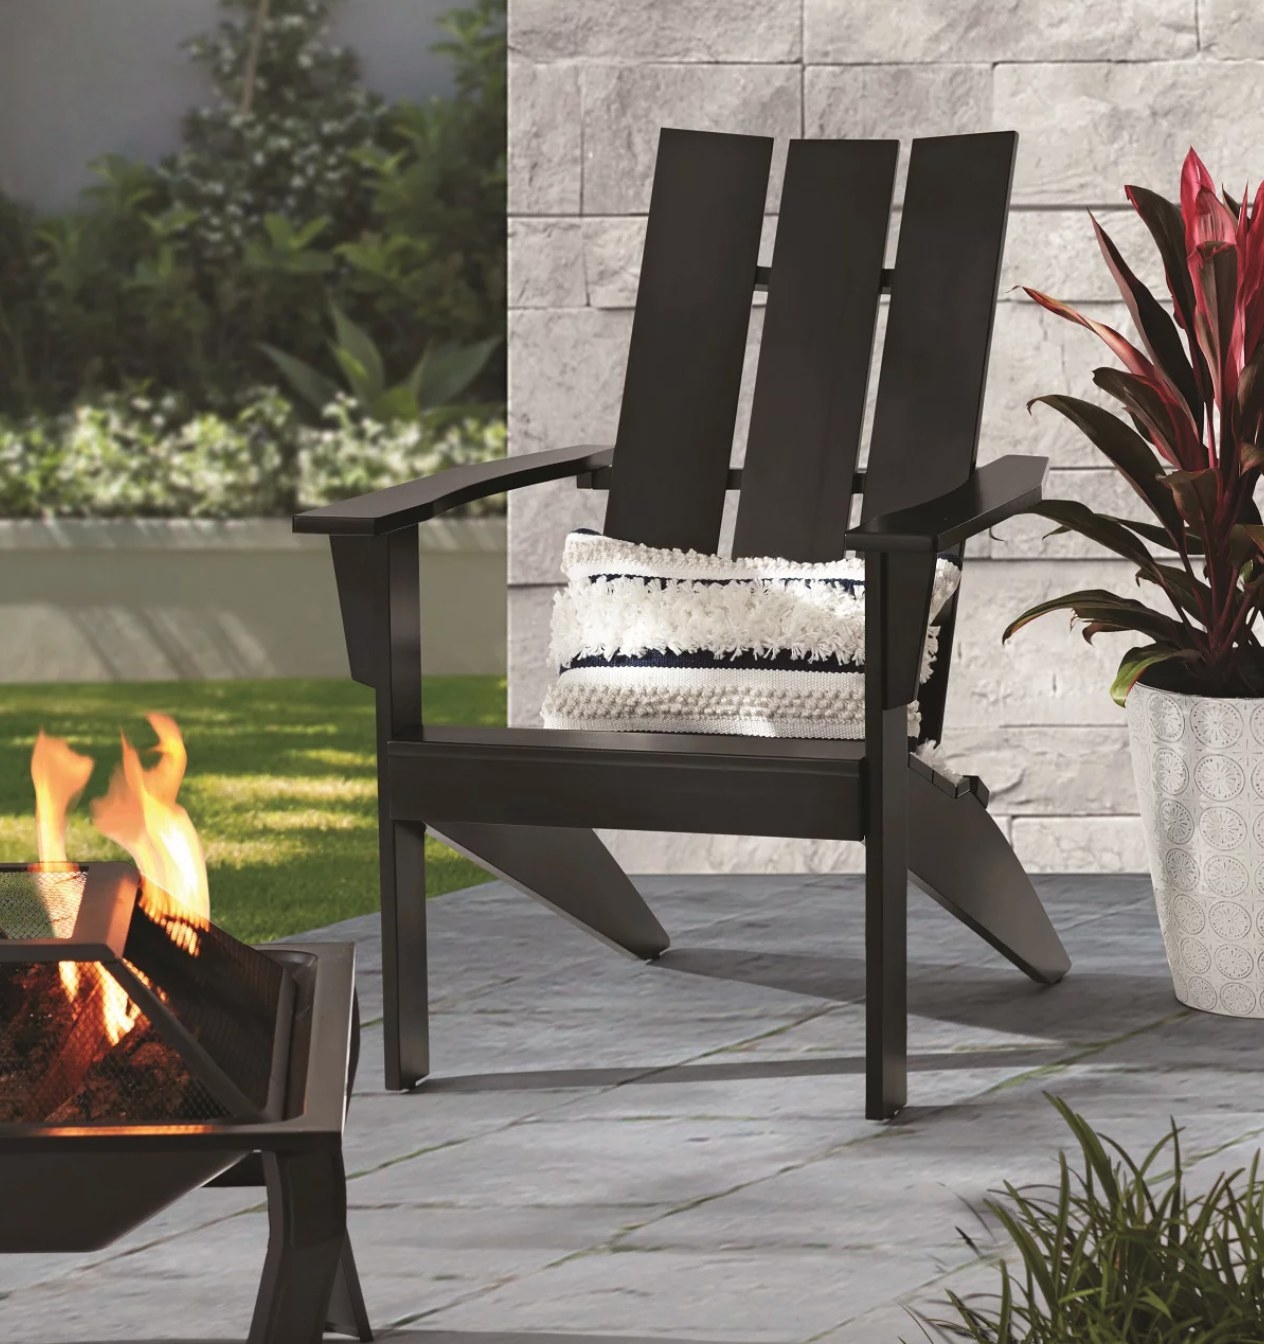 the black adirondack chair in a decorated patio space